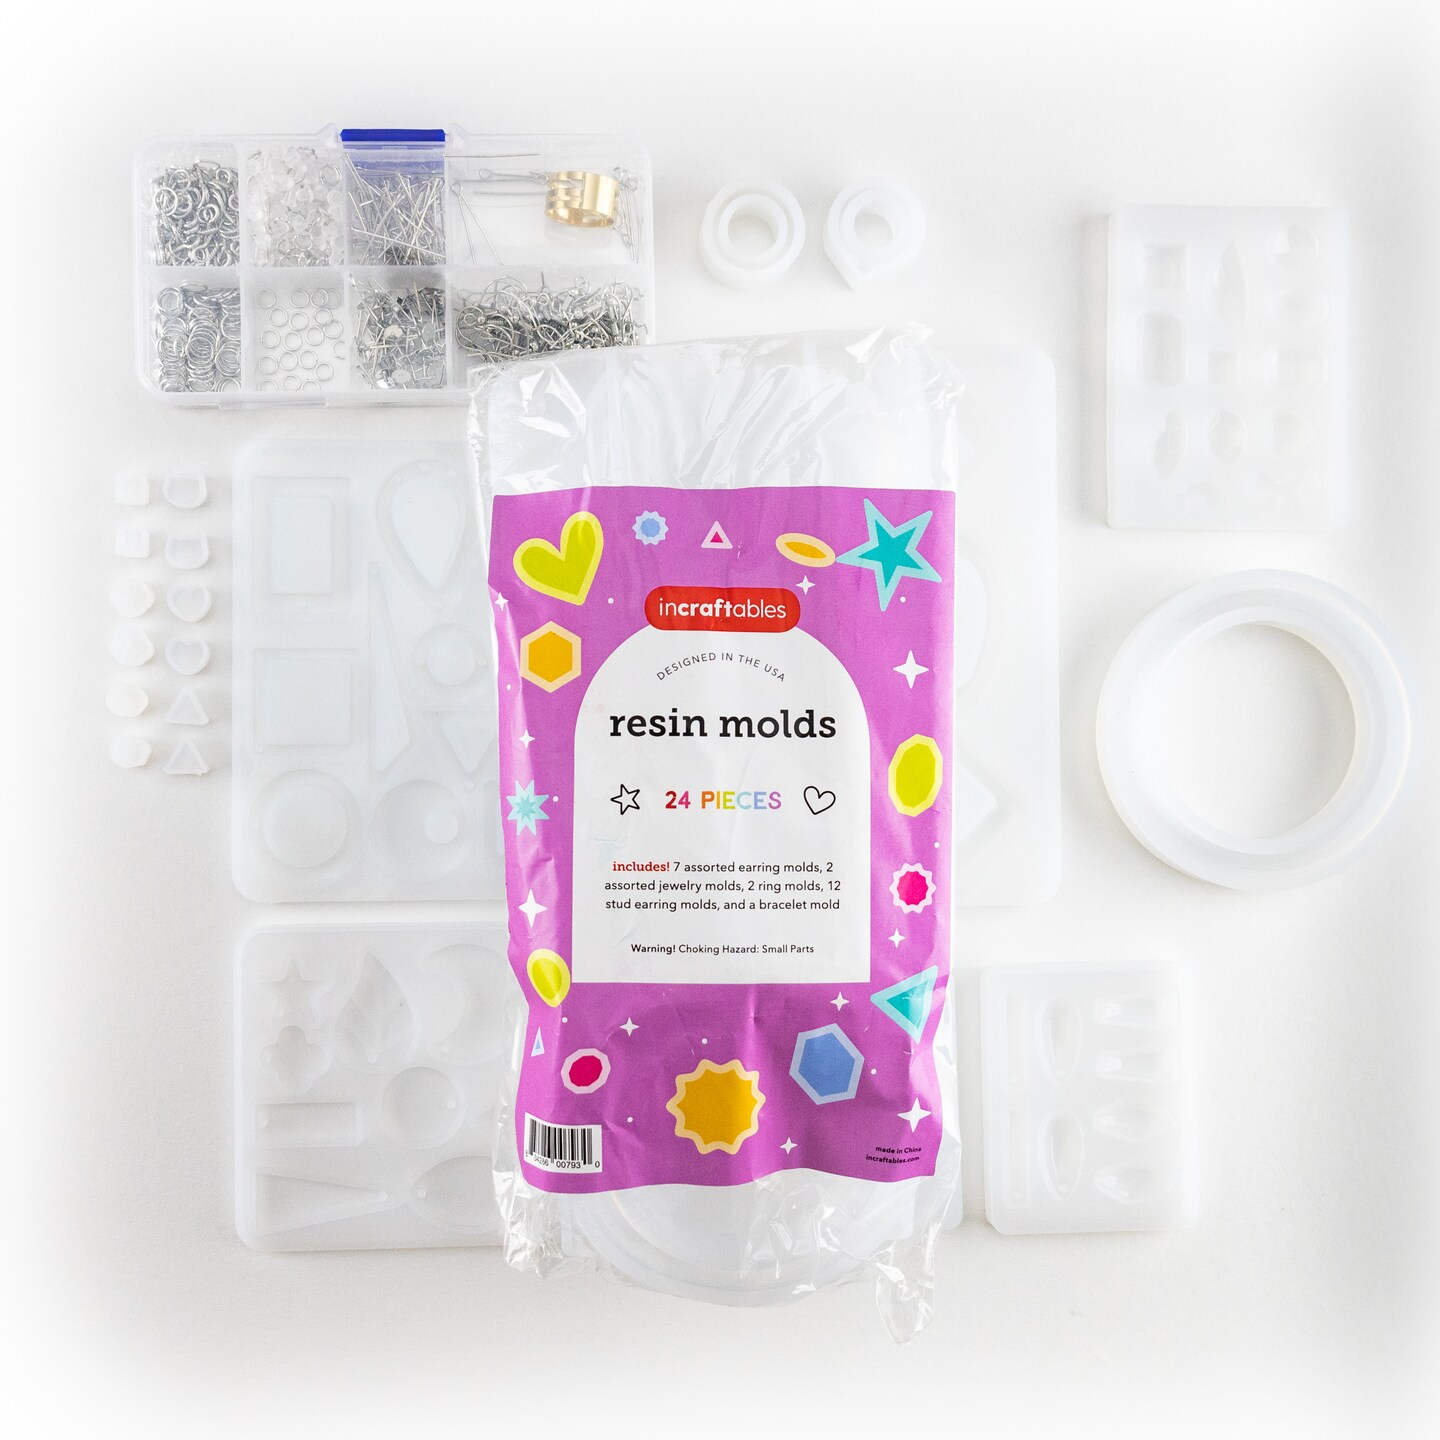 Incraftables Epoxy Resin Molds Kit Bundle. Silicone Resin Kit with Molds including 24pcs Molds, Earring, Keychain, Bracelet &#x26; DIY Jewelry Making Supplies. Large Epoxy Resin Kits and Molds Complete Set